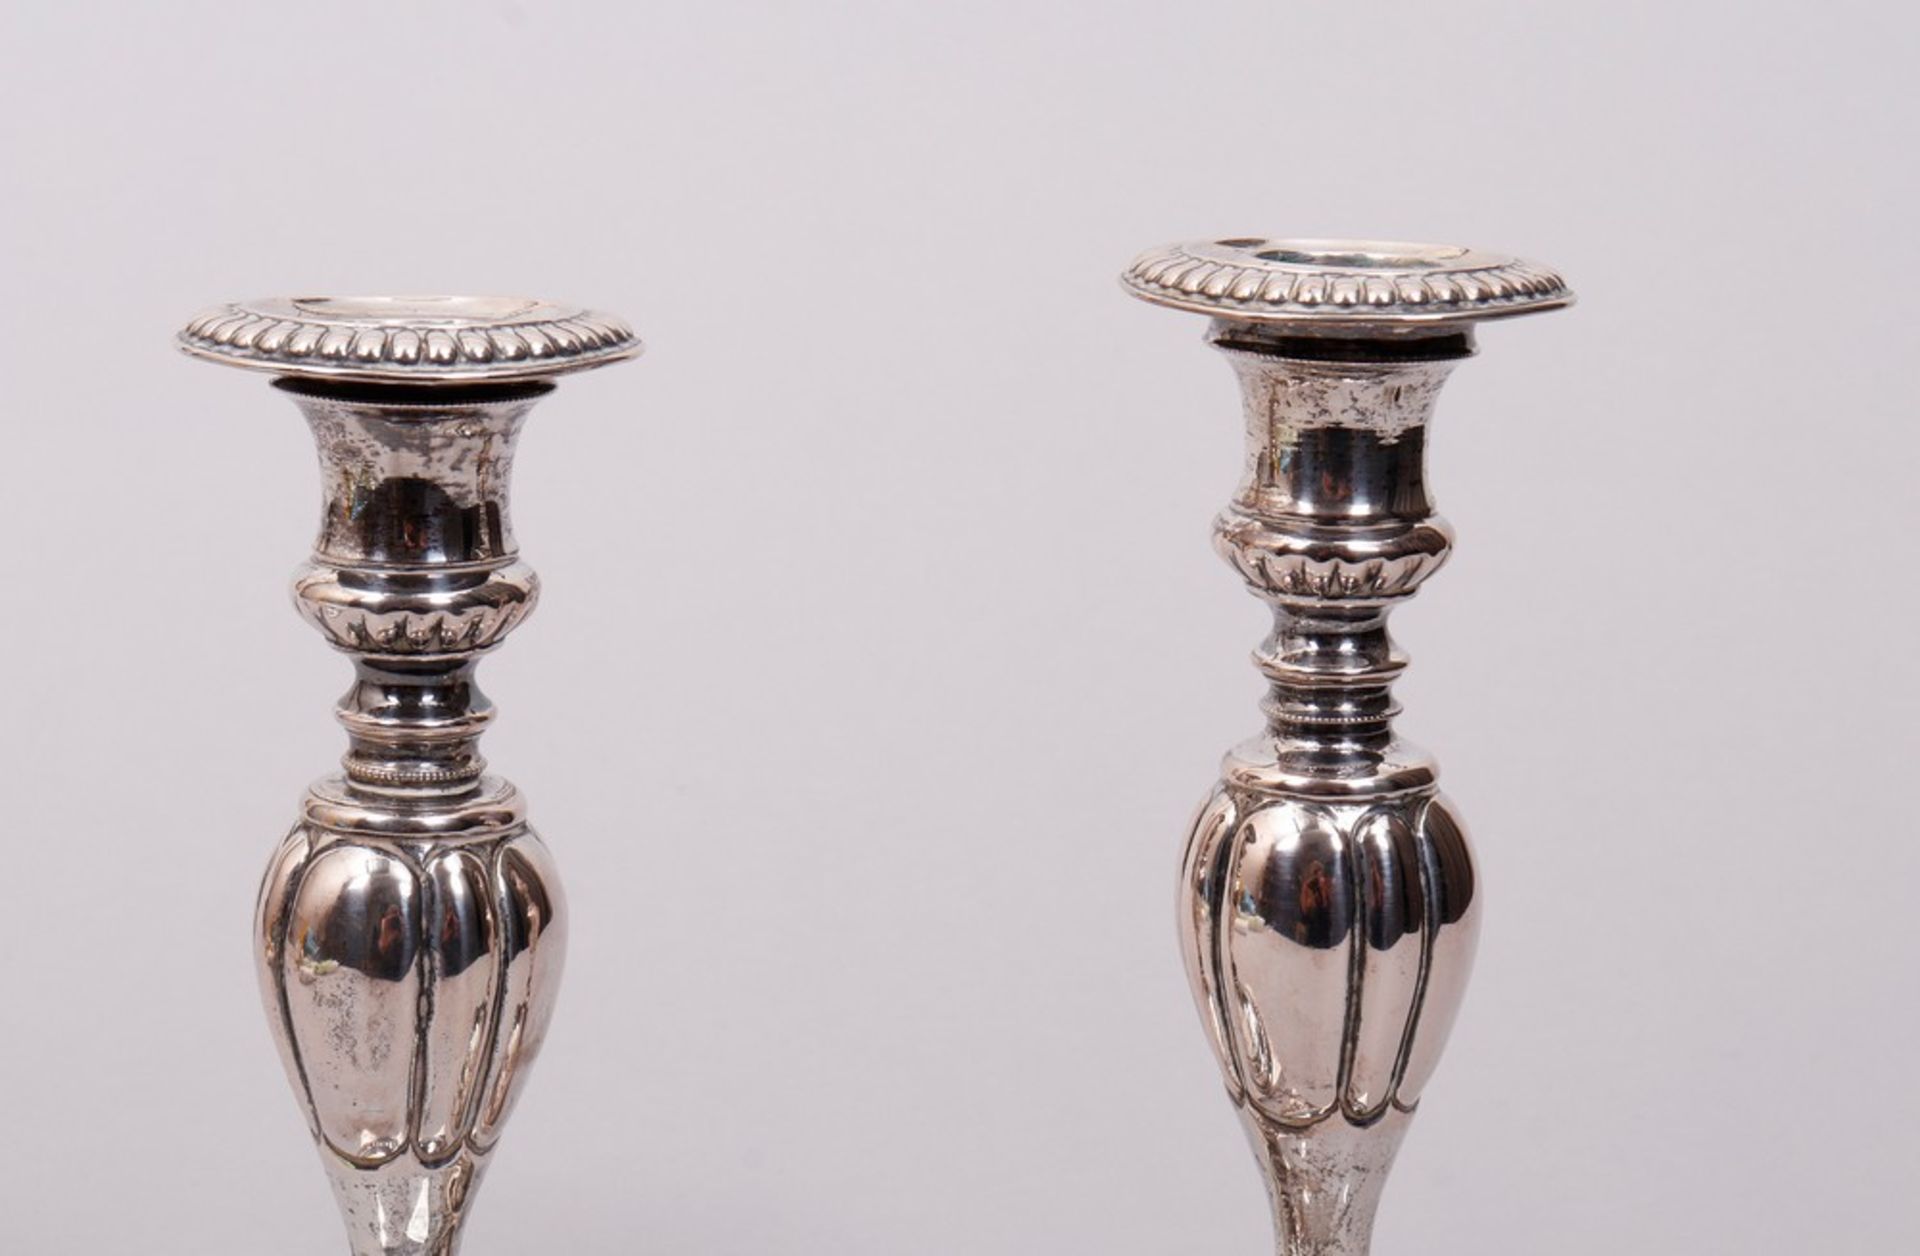 Pair of table candlesticks, silver, Berlin, 1st half 19th C. - Image 2 of 4